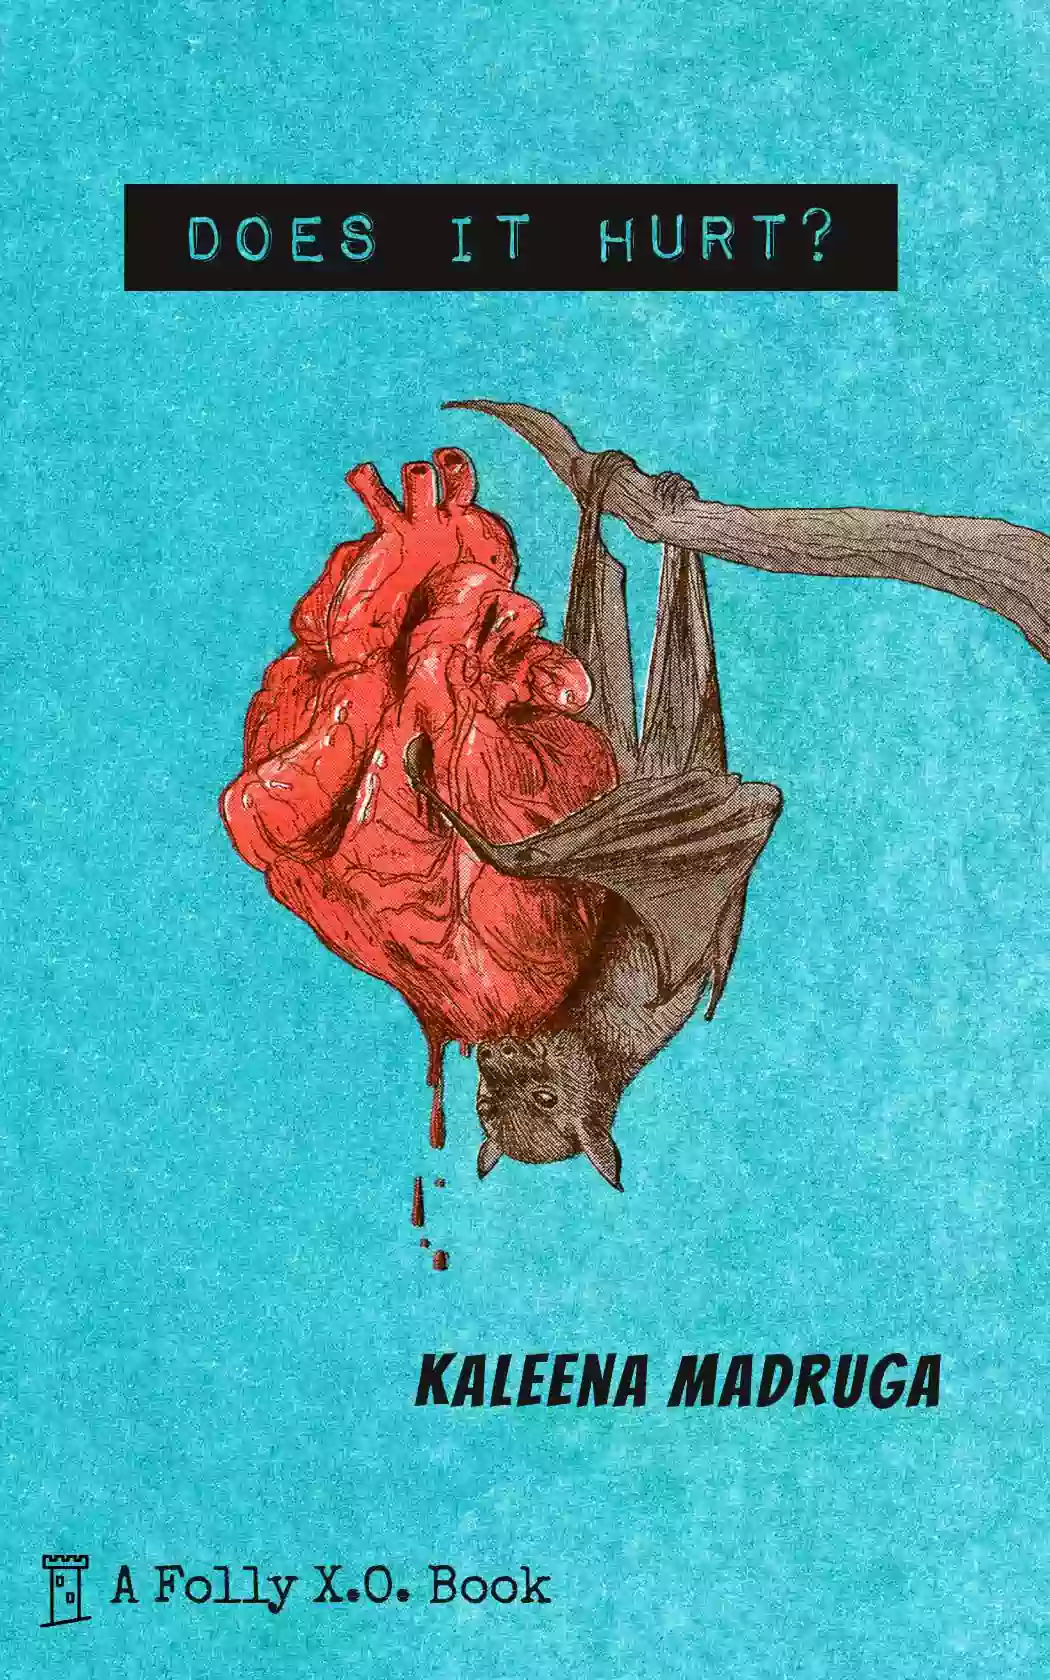 Cover of Does It Hurt, a fruit bat eating a ripe human heart while hanging in a tree.